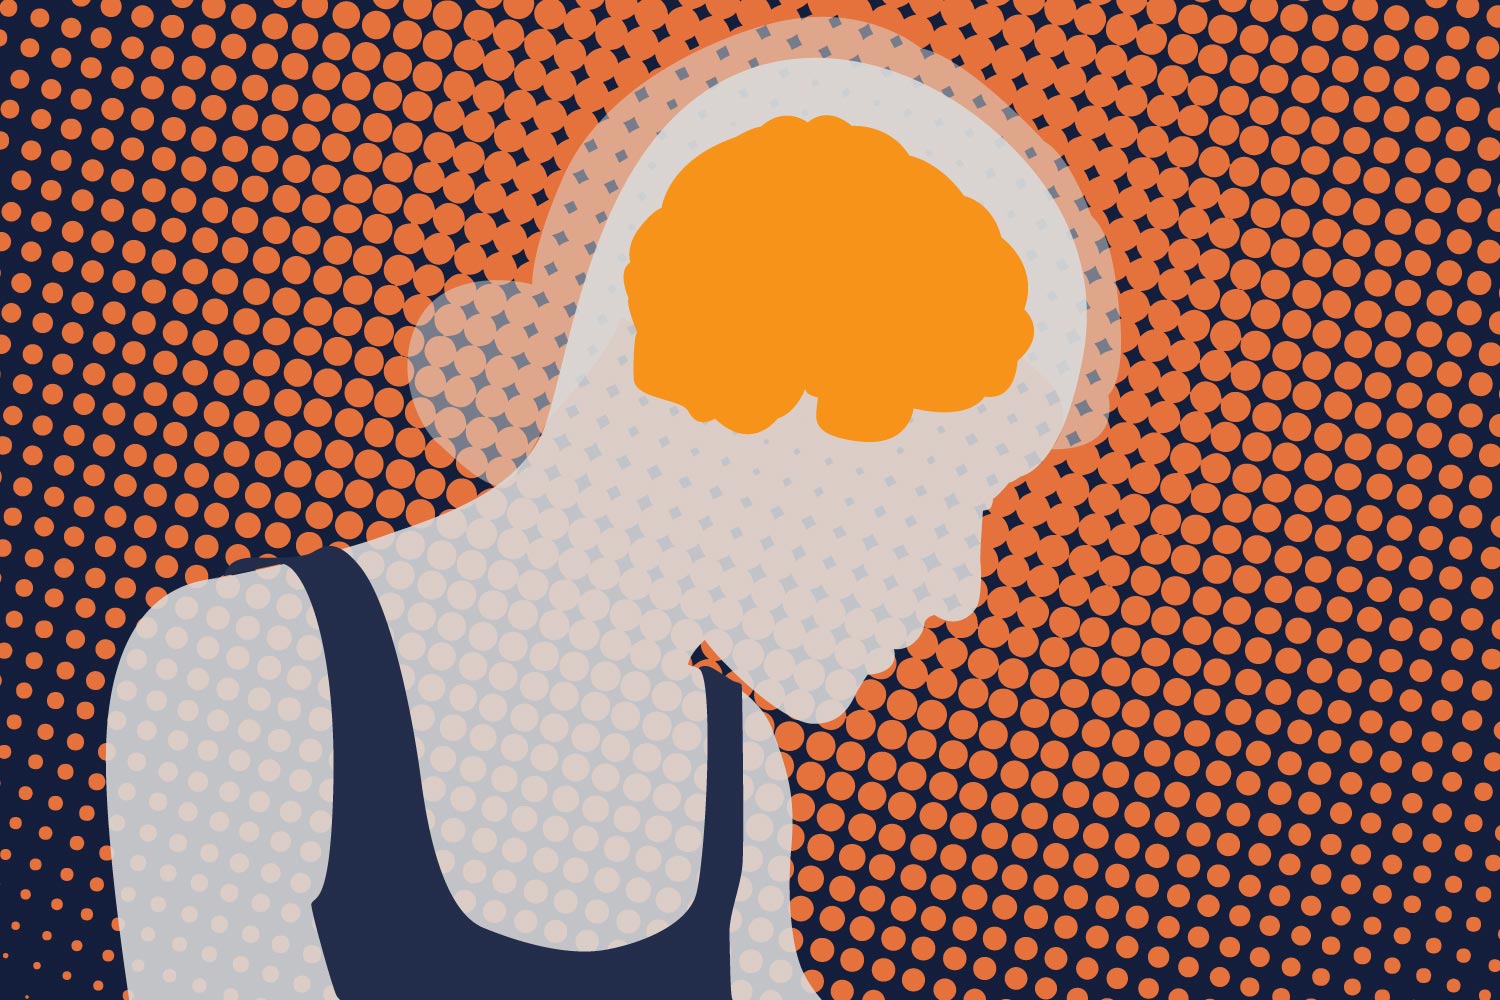 Illustration of a person with an orange brain